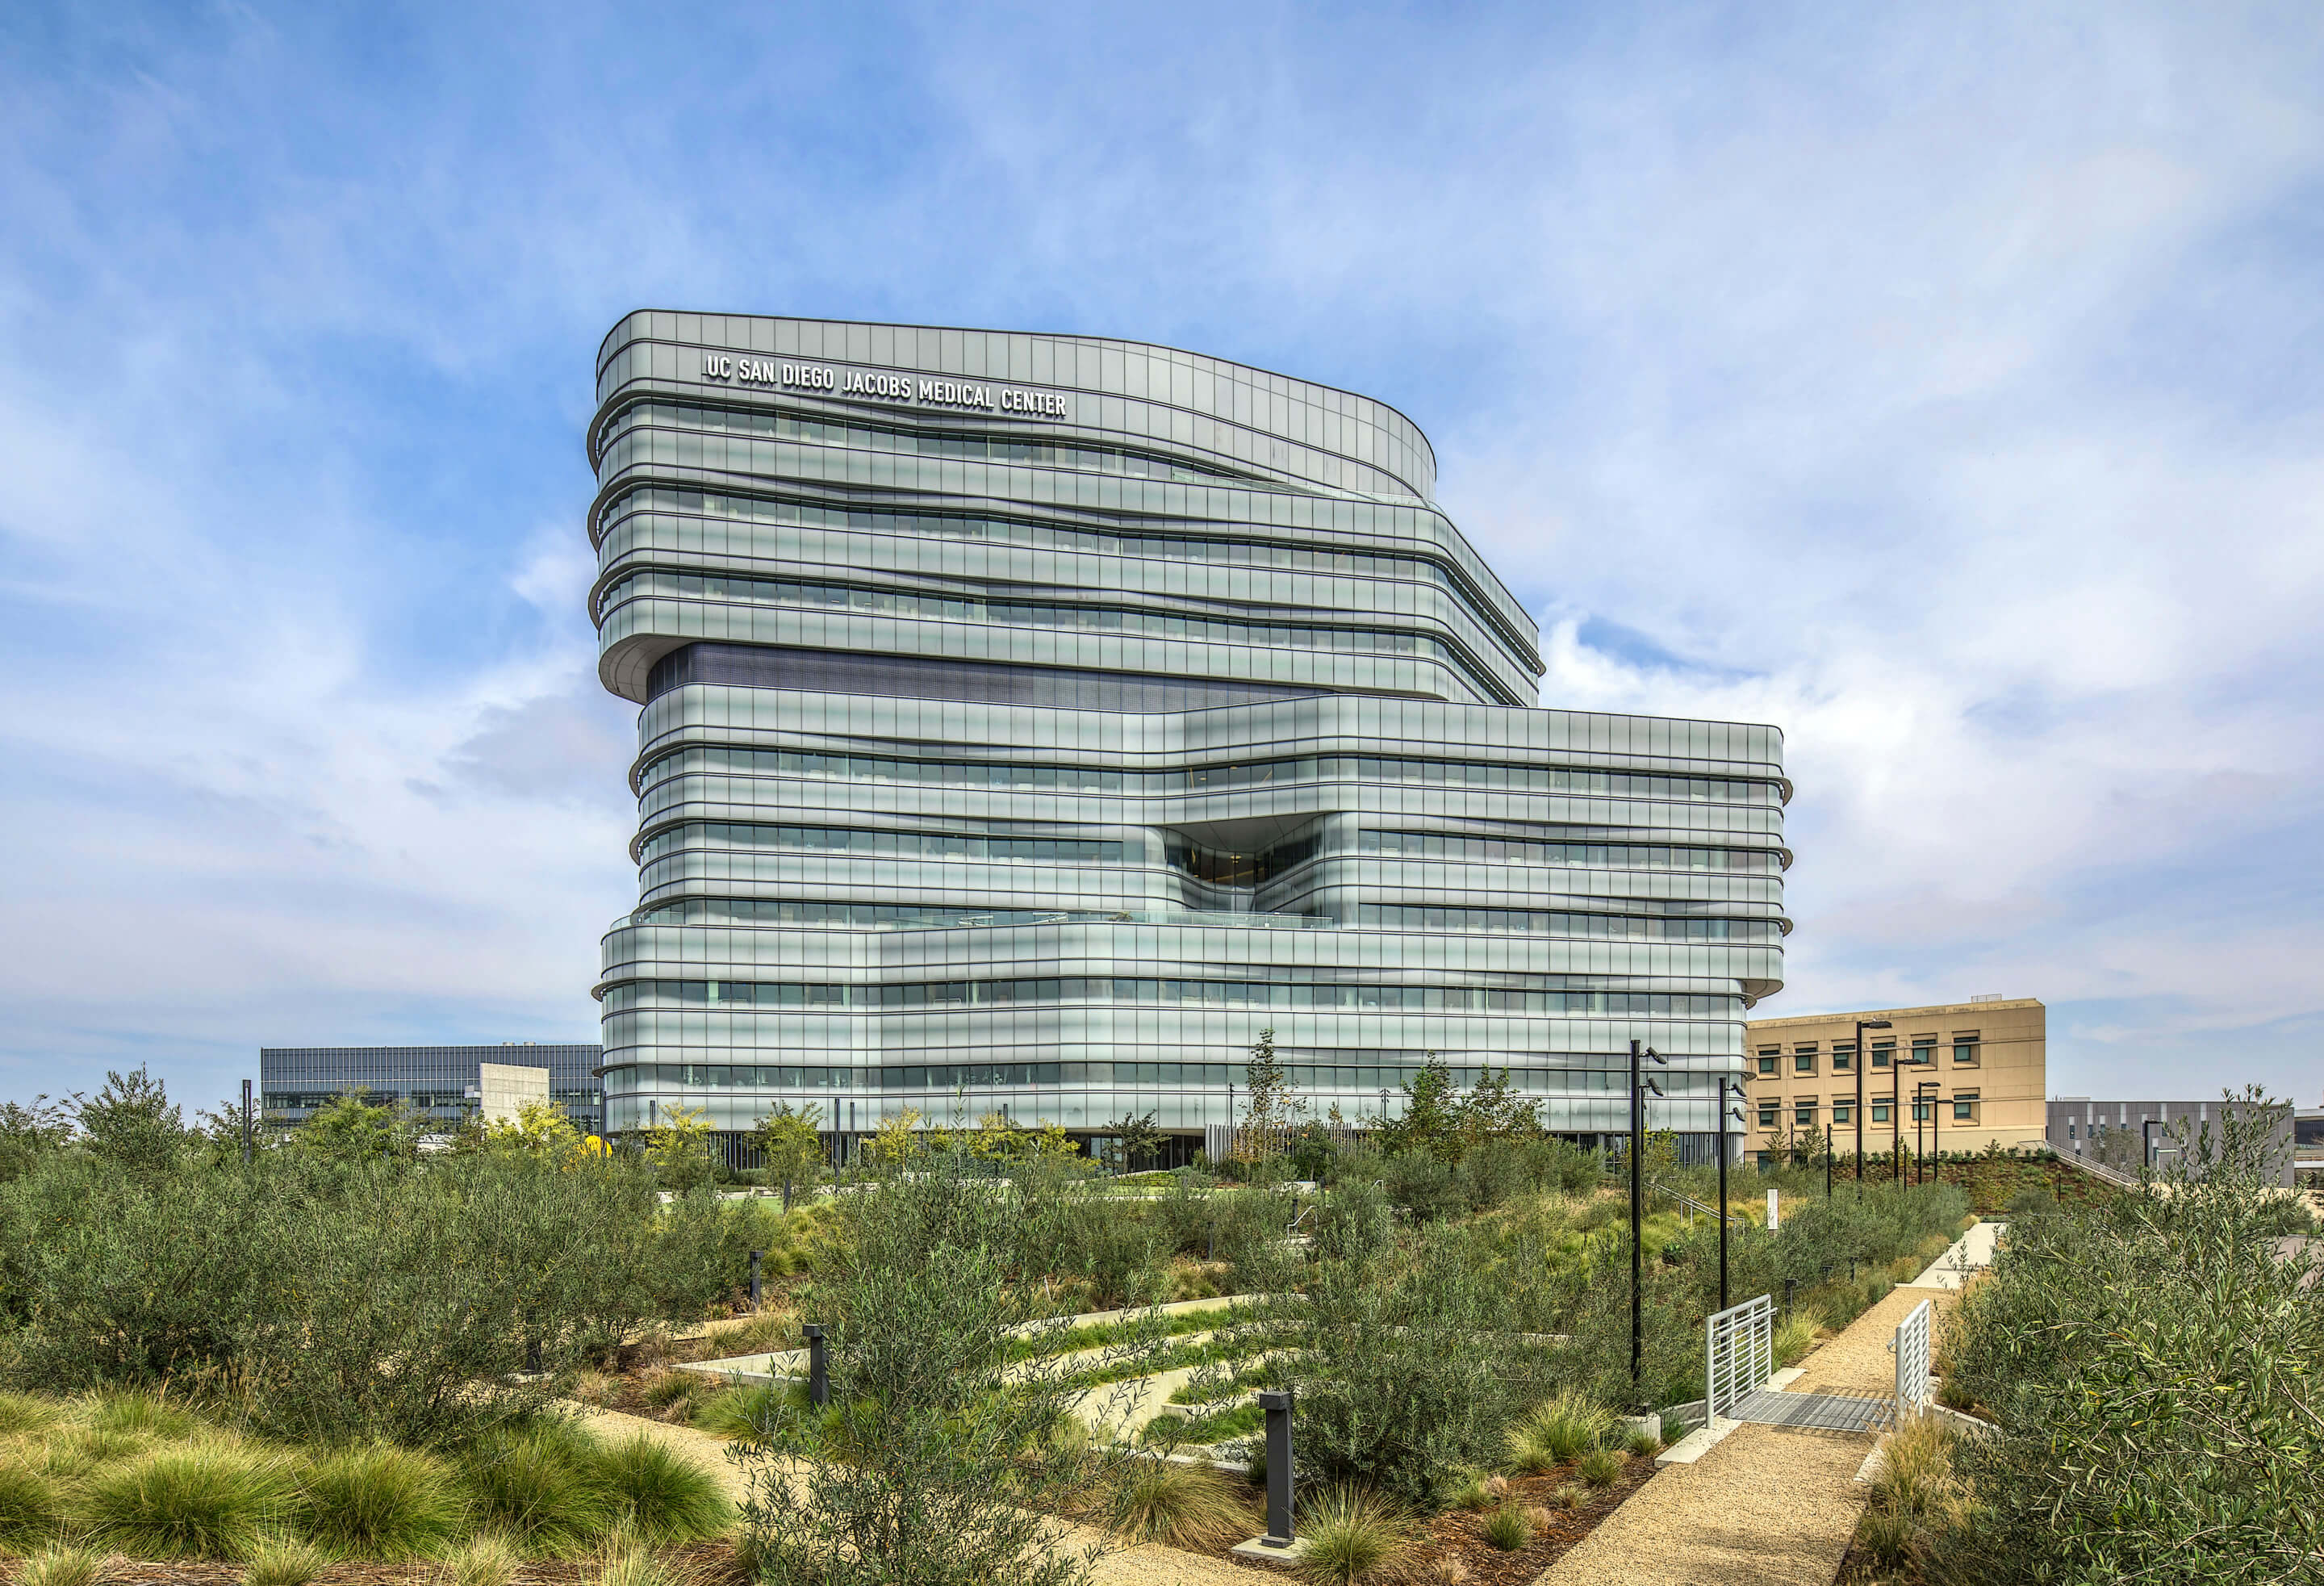 Image of the Jacobs Medical Center in San Diego and its glass skin